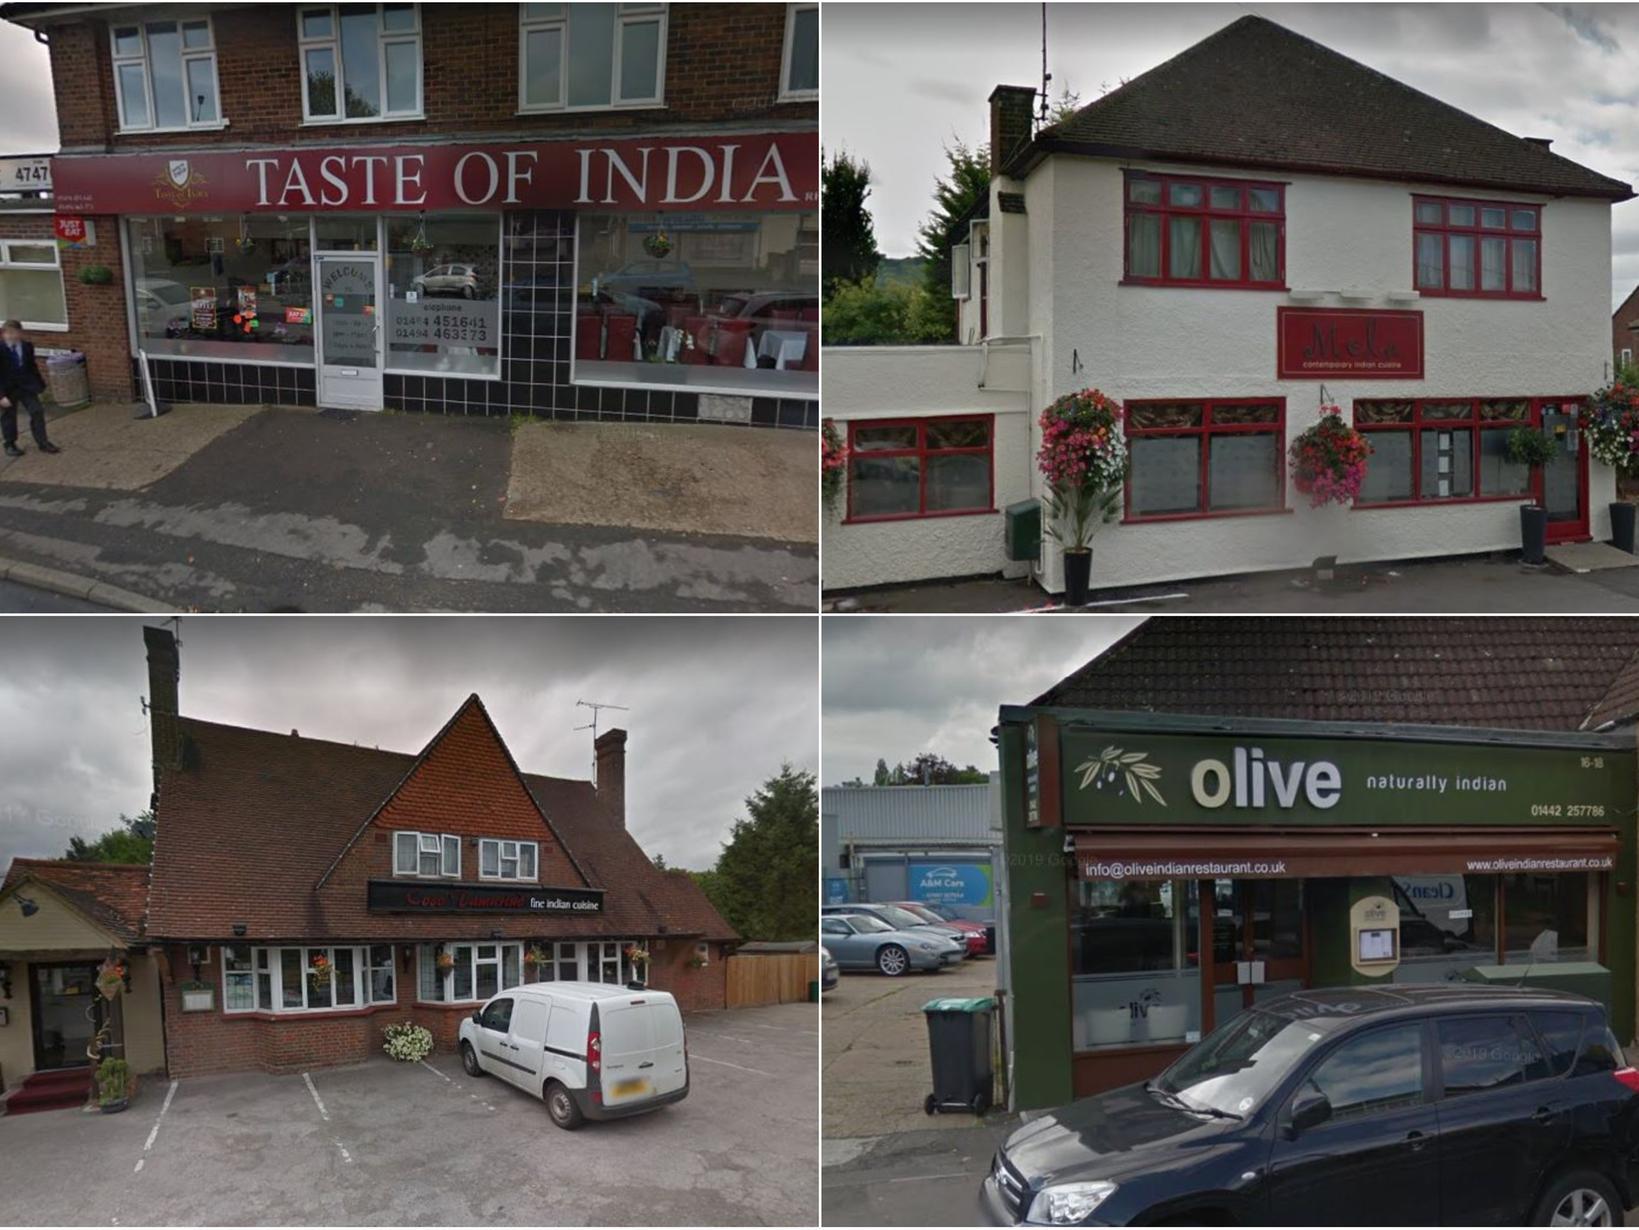 These are the top-rated takeaway restaurants in Buckinghamshire according to TripAdvisor.